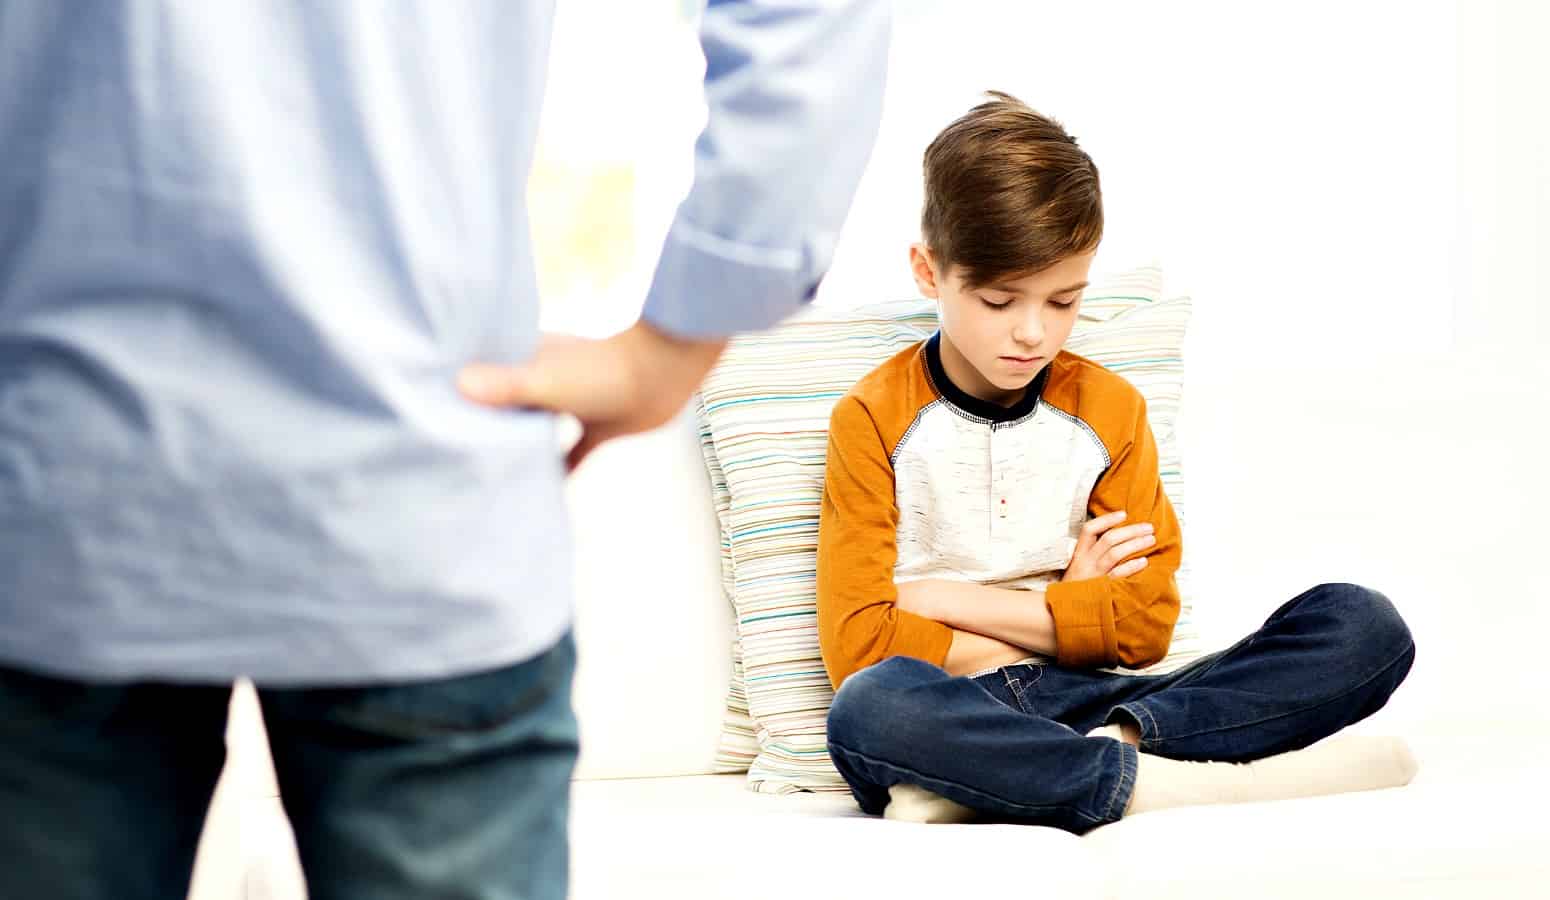 Consequences for Children’s Bad Behavior